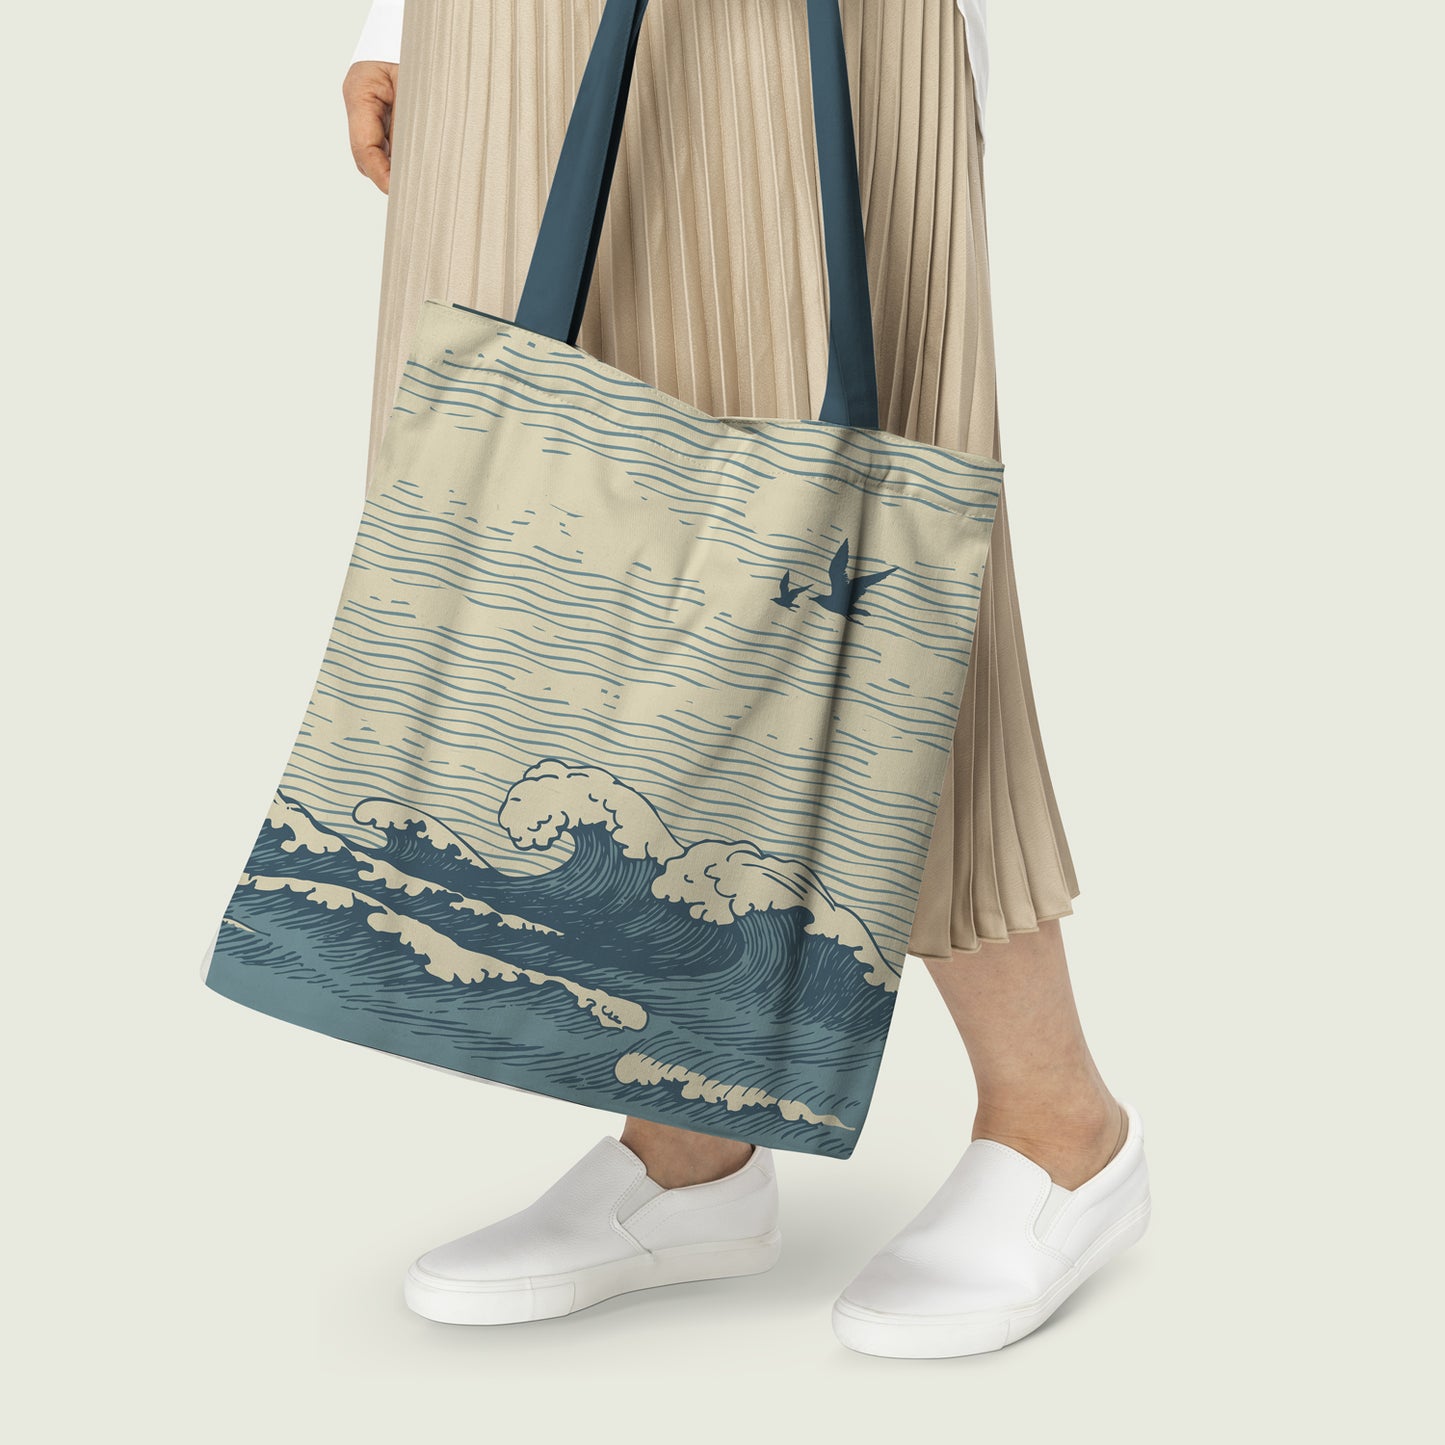 A Women holding a pleated beige skirt and white slip-on shoes carrying a tote bag with a blue and beige wave print design.